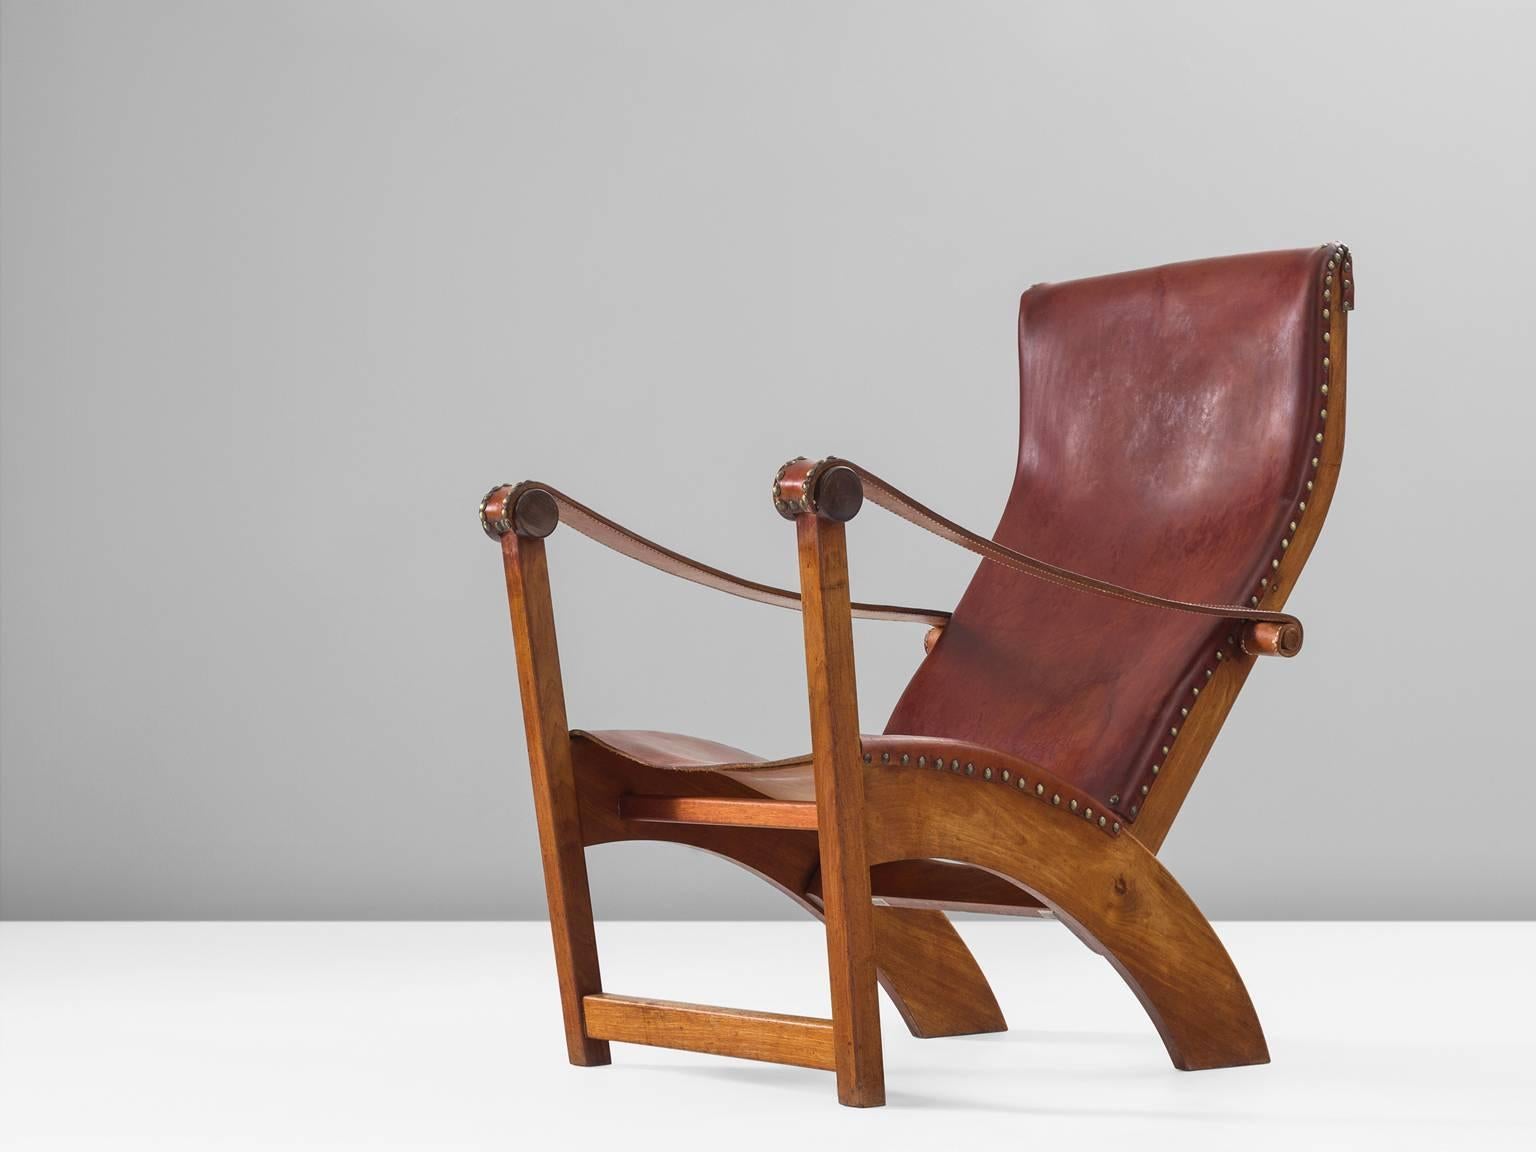 Lounge chair model 'Københavnerstolen', in mahogany and leather, by Mogens Voltelen for Niels Vodder, Denmark, 1936. 

This is the so called Copenhagen chair by Mogens Voltelen. This chair shows beautiful lines as seen on the arched legs on the back